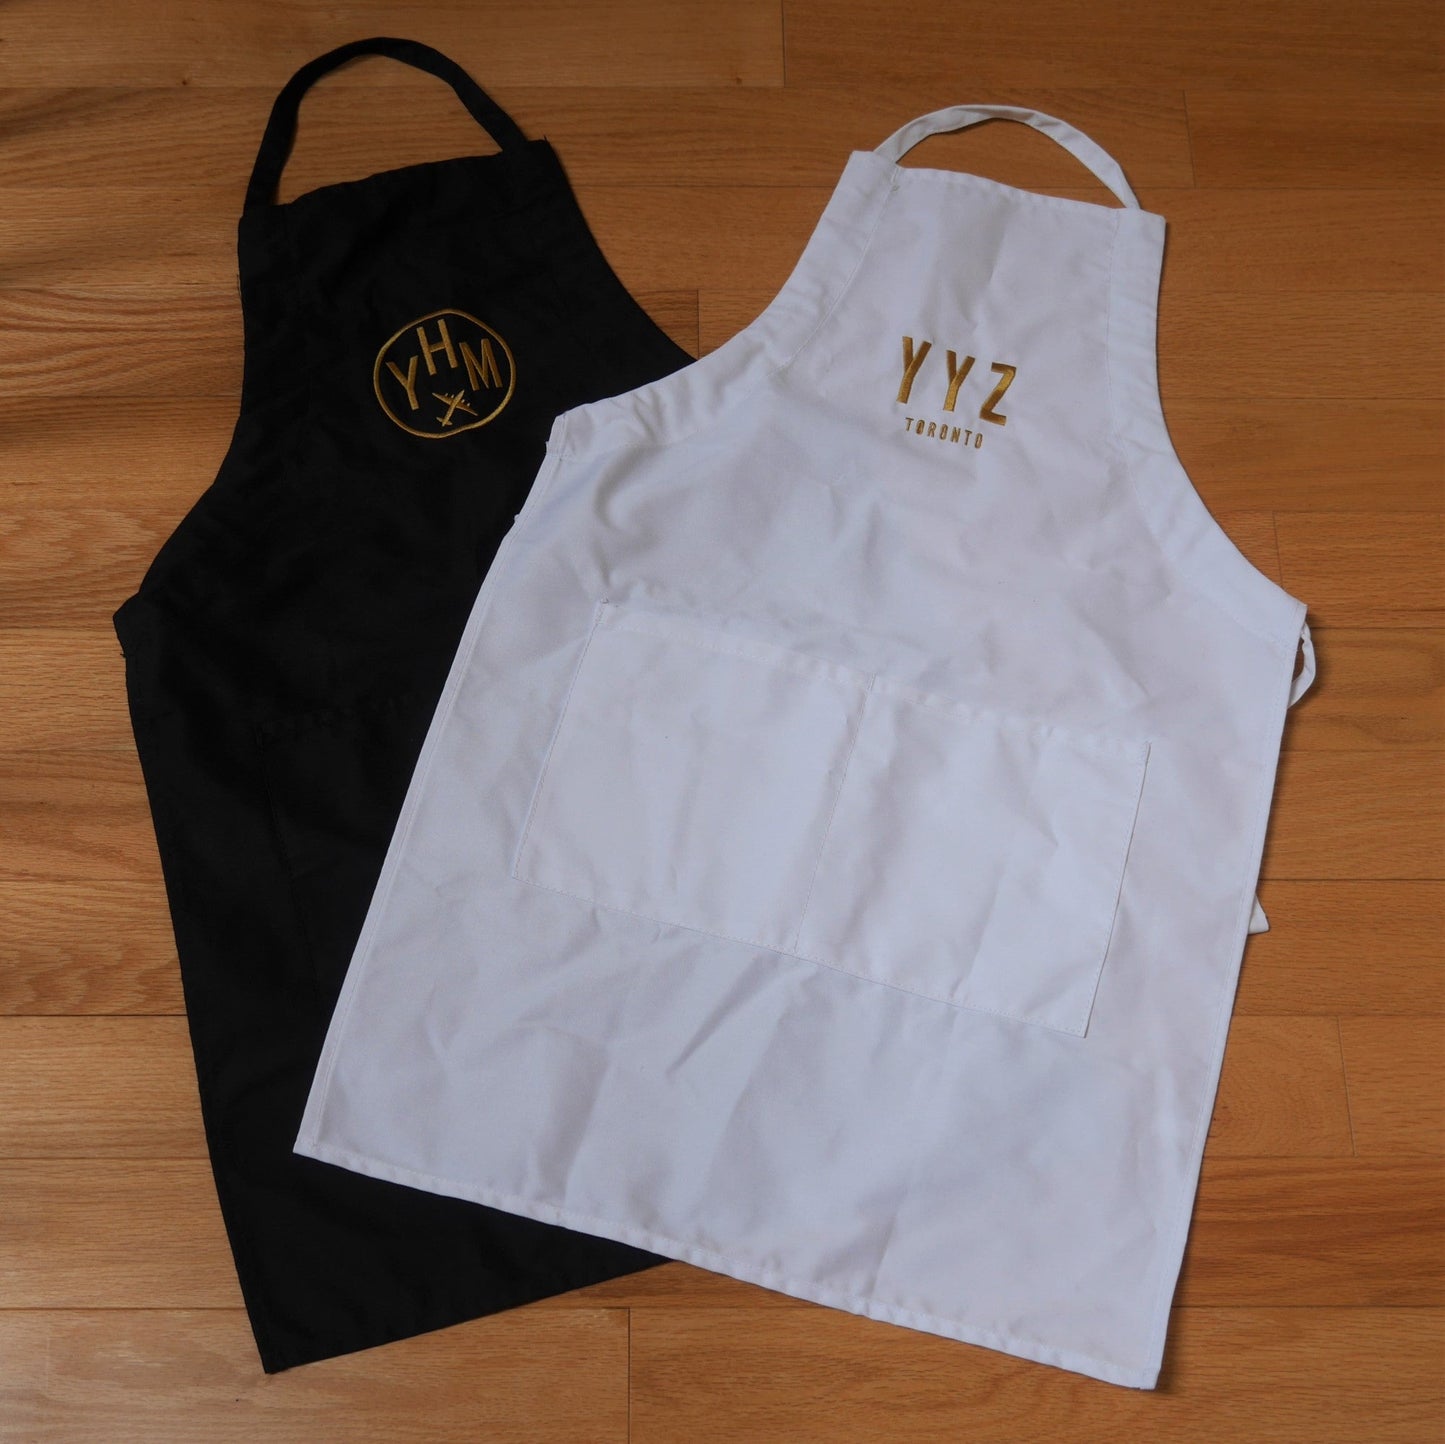 City Embroidered Apron - Old Gold • YYZ Toronto • YHM Designs - Image 12